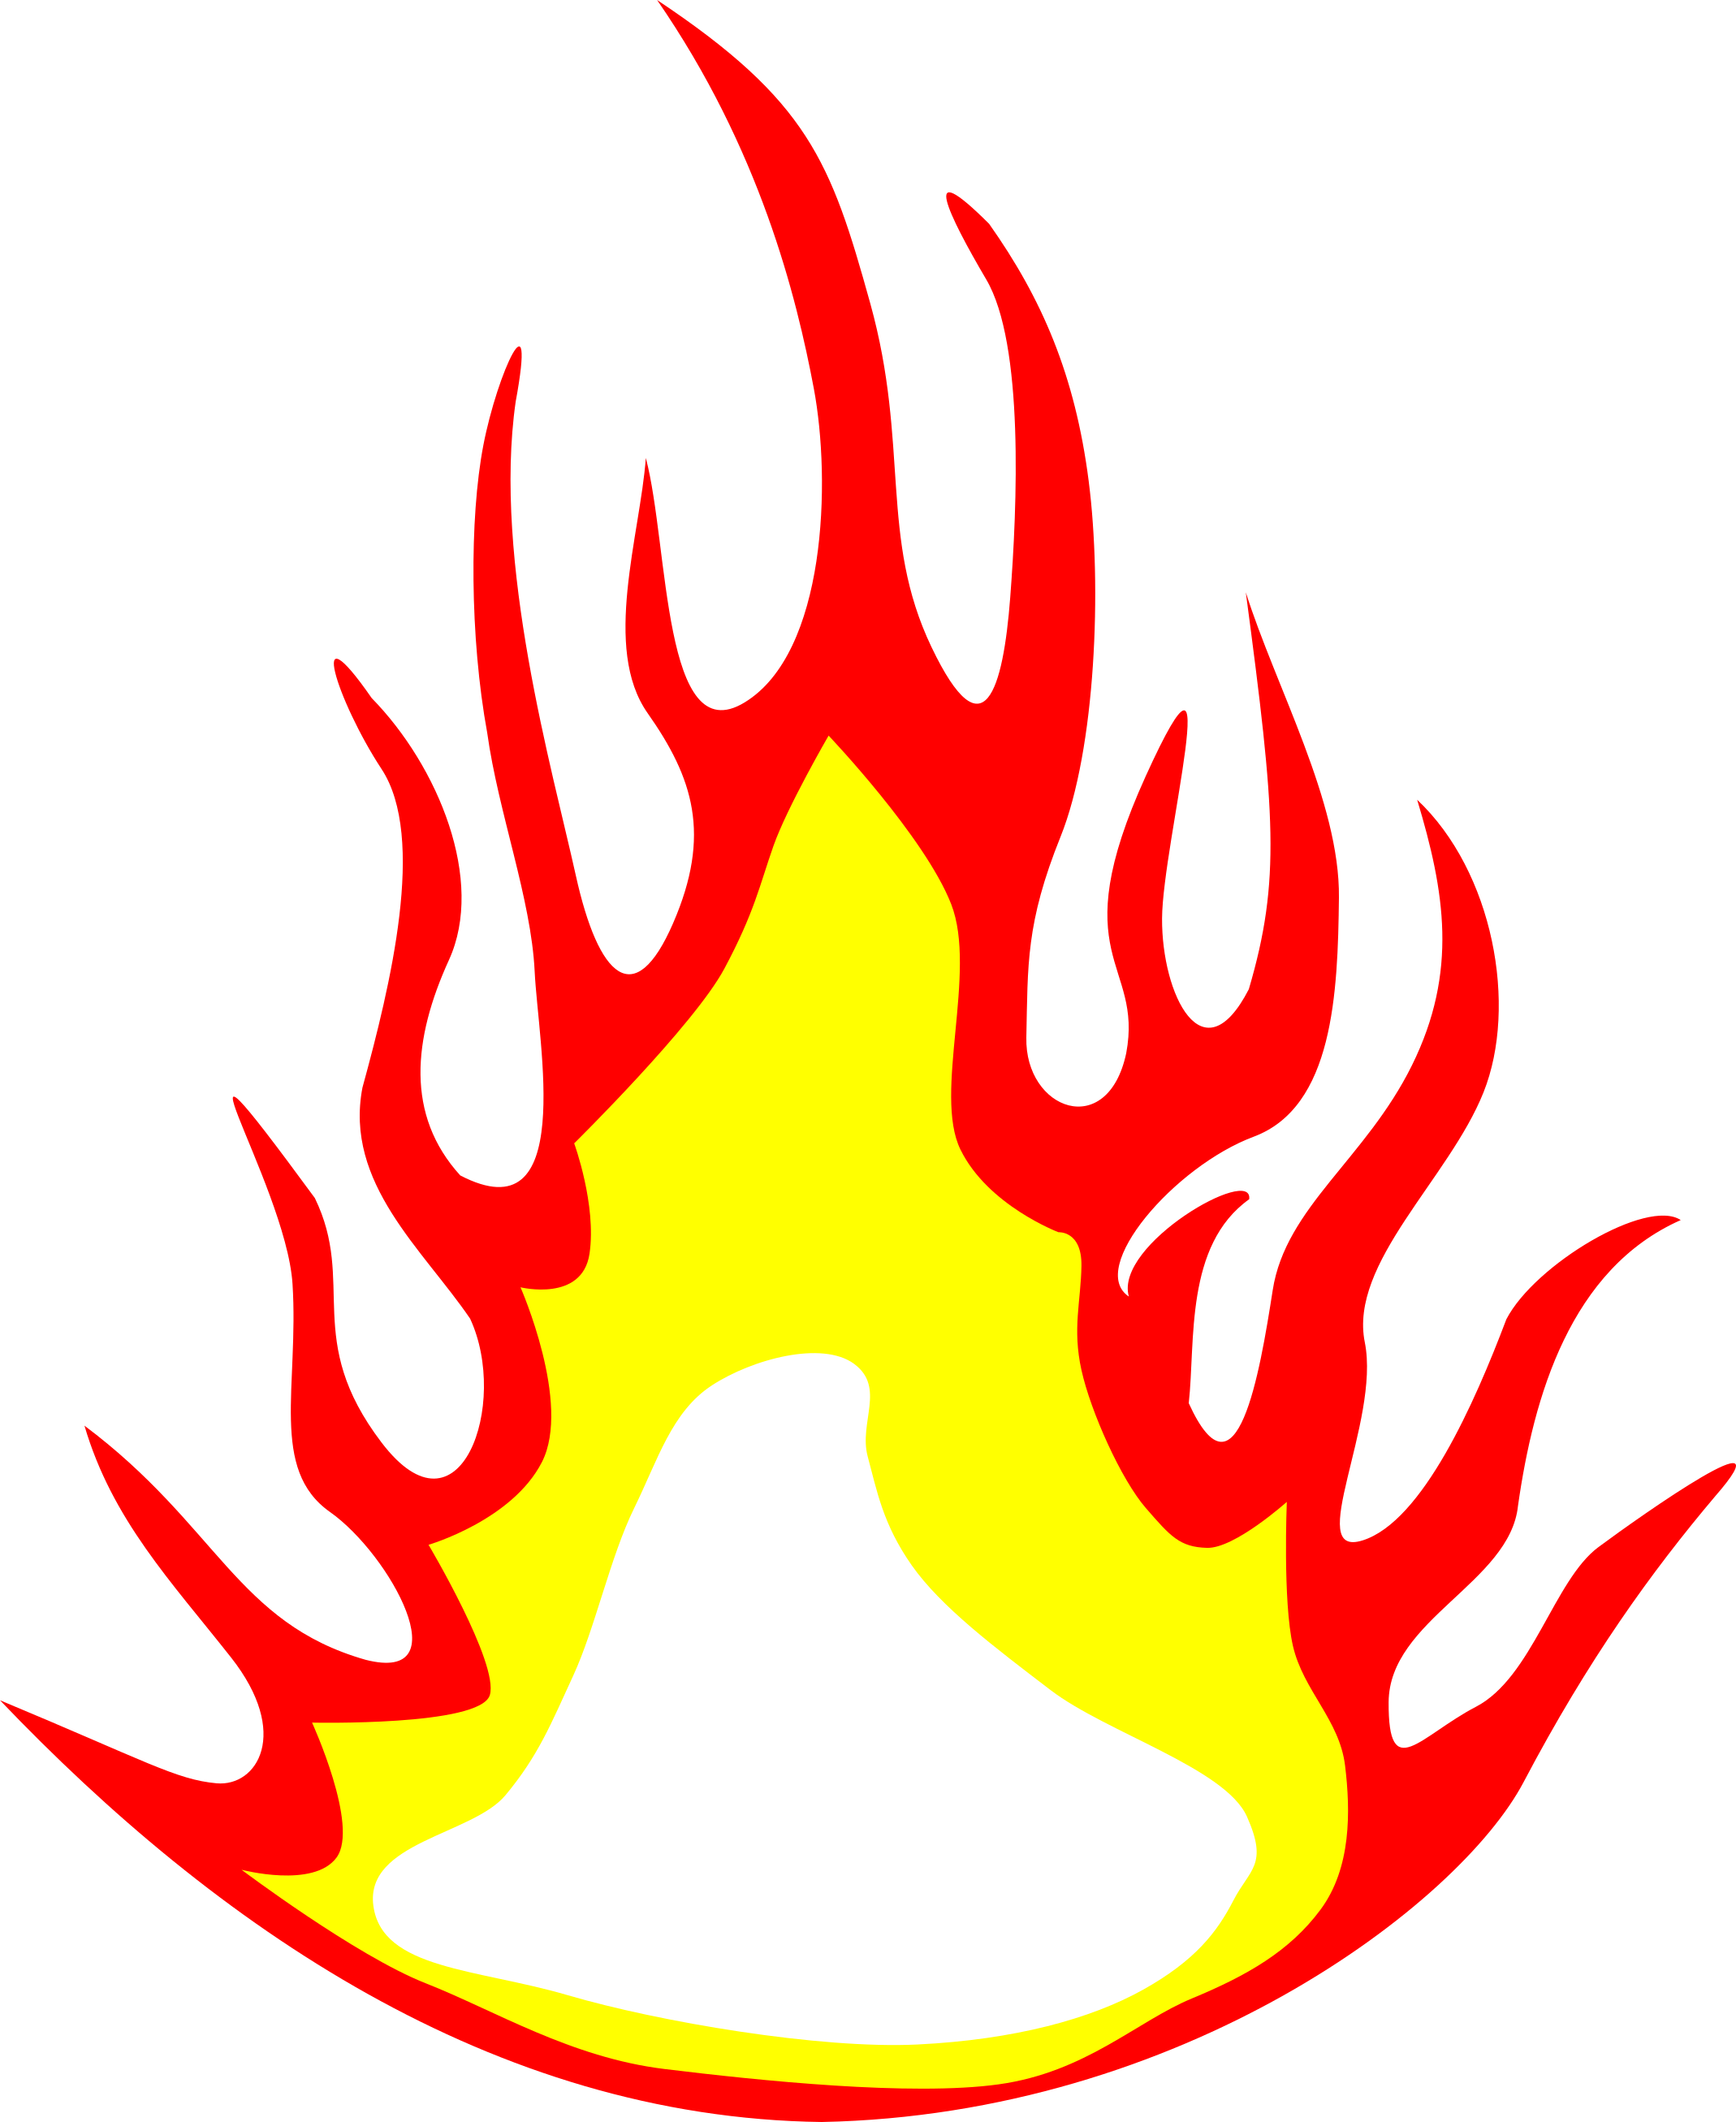 5 Fire Flame Clipart